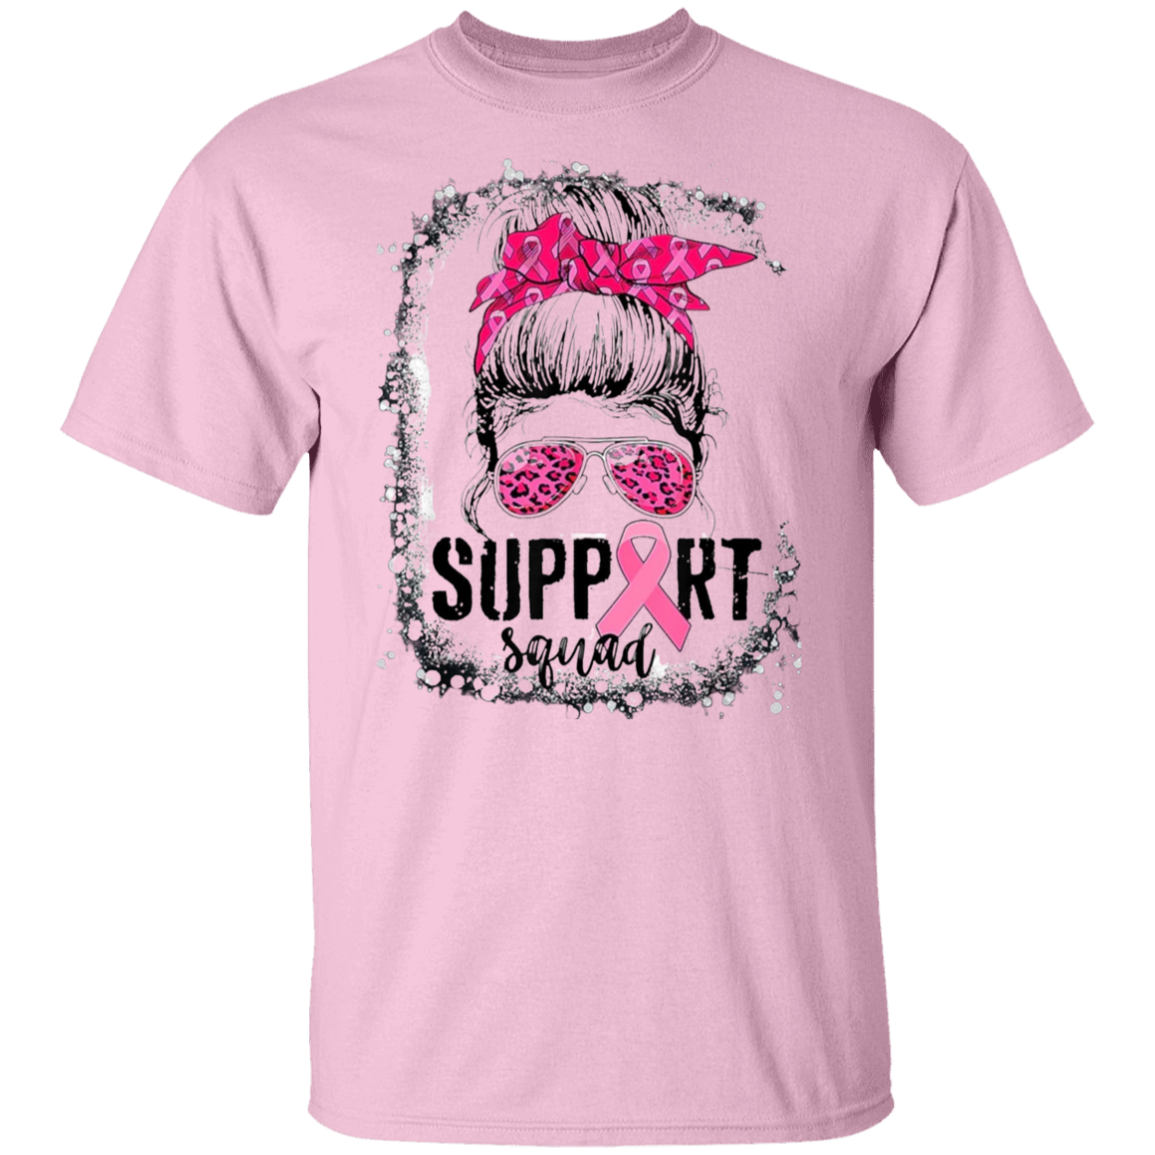 Support Squad! Tee